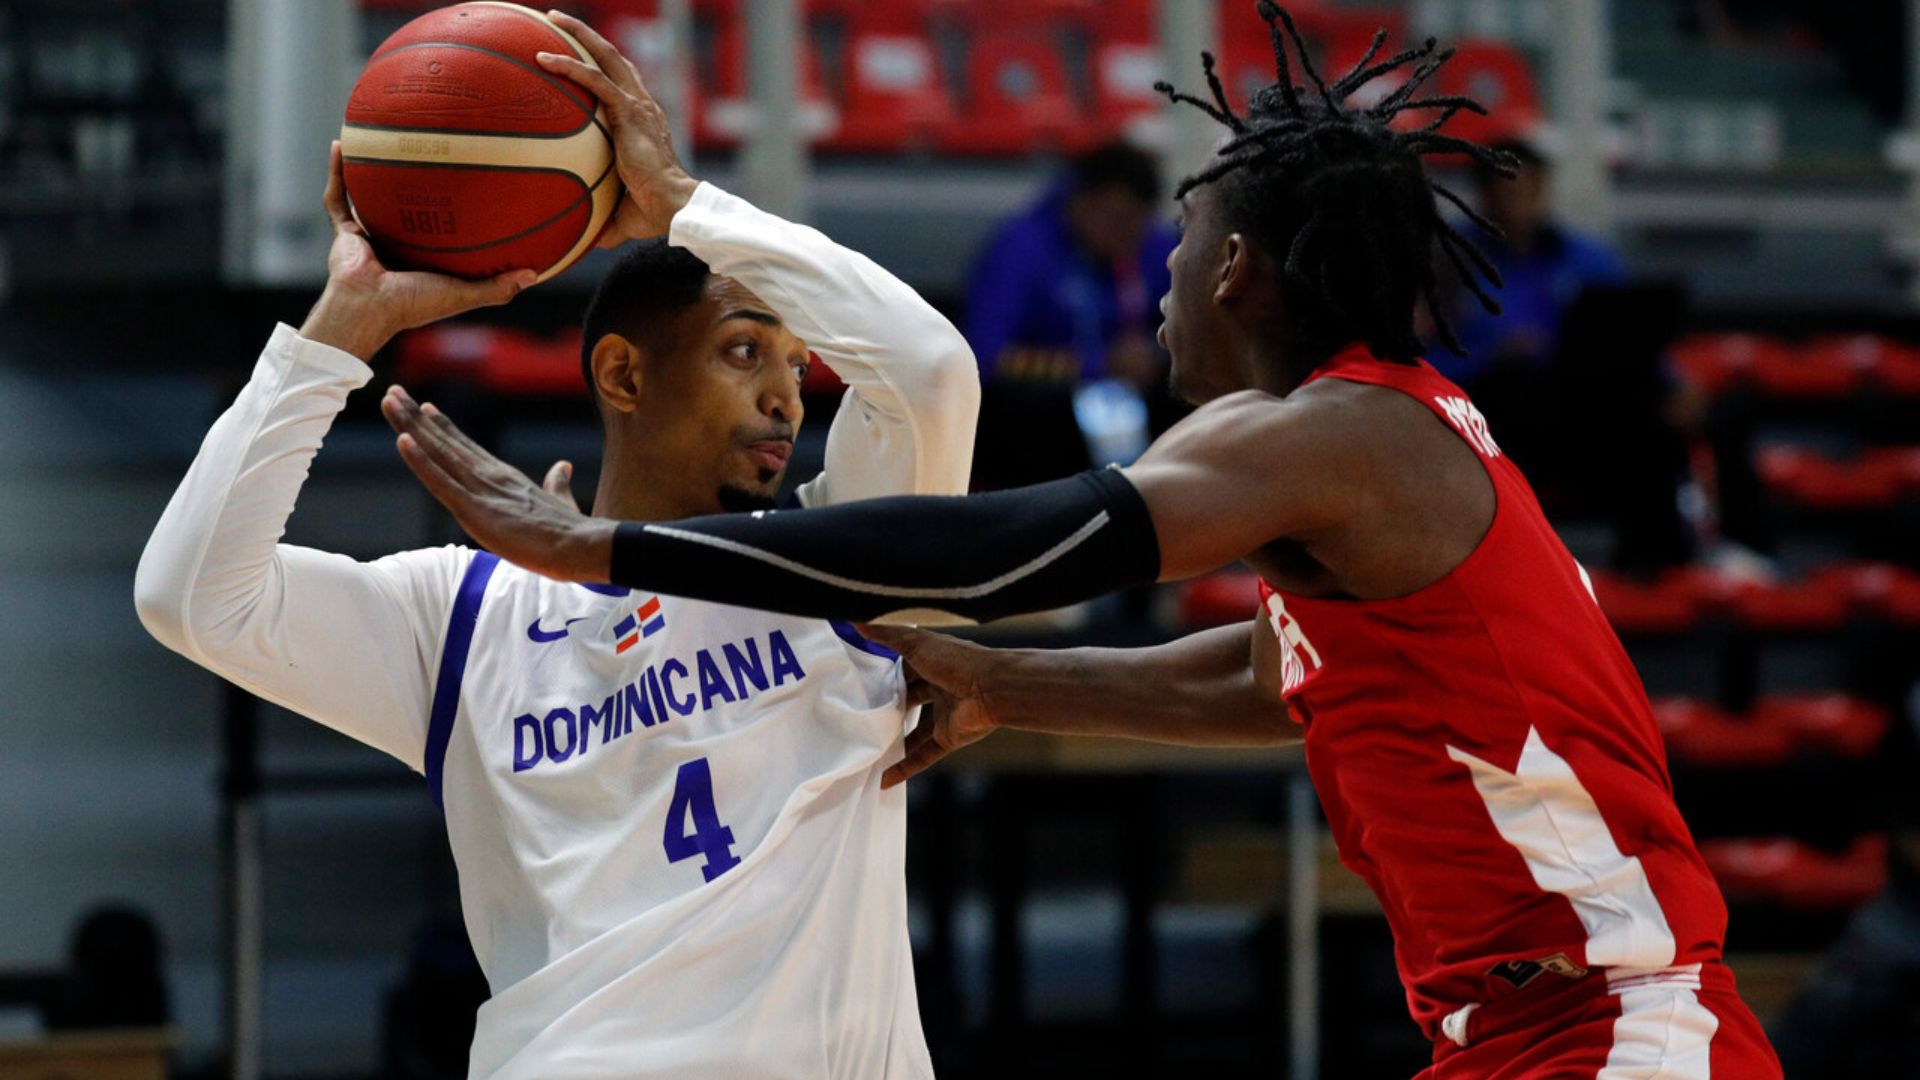 Male's Basketball: Clear victory for the Dominican Republic